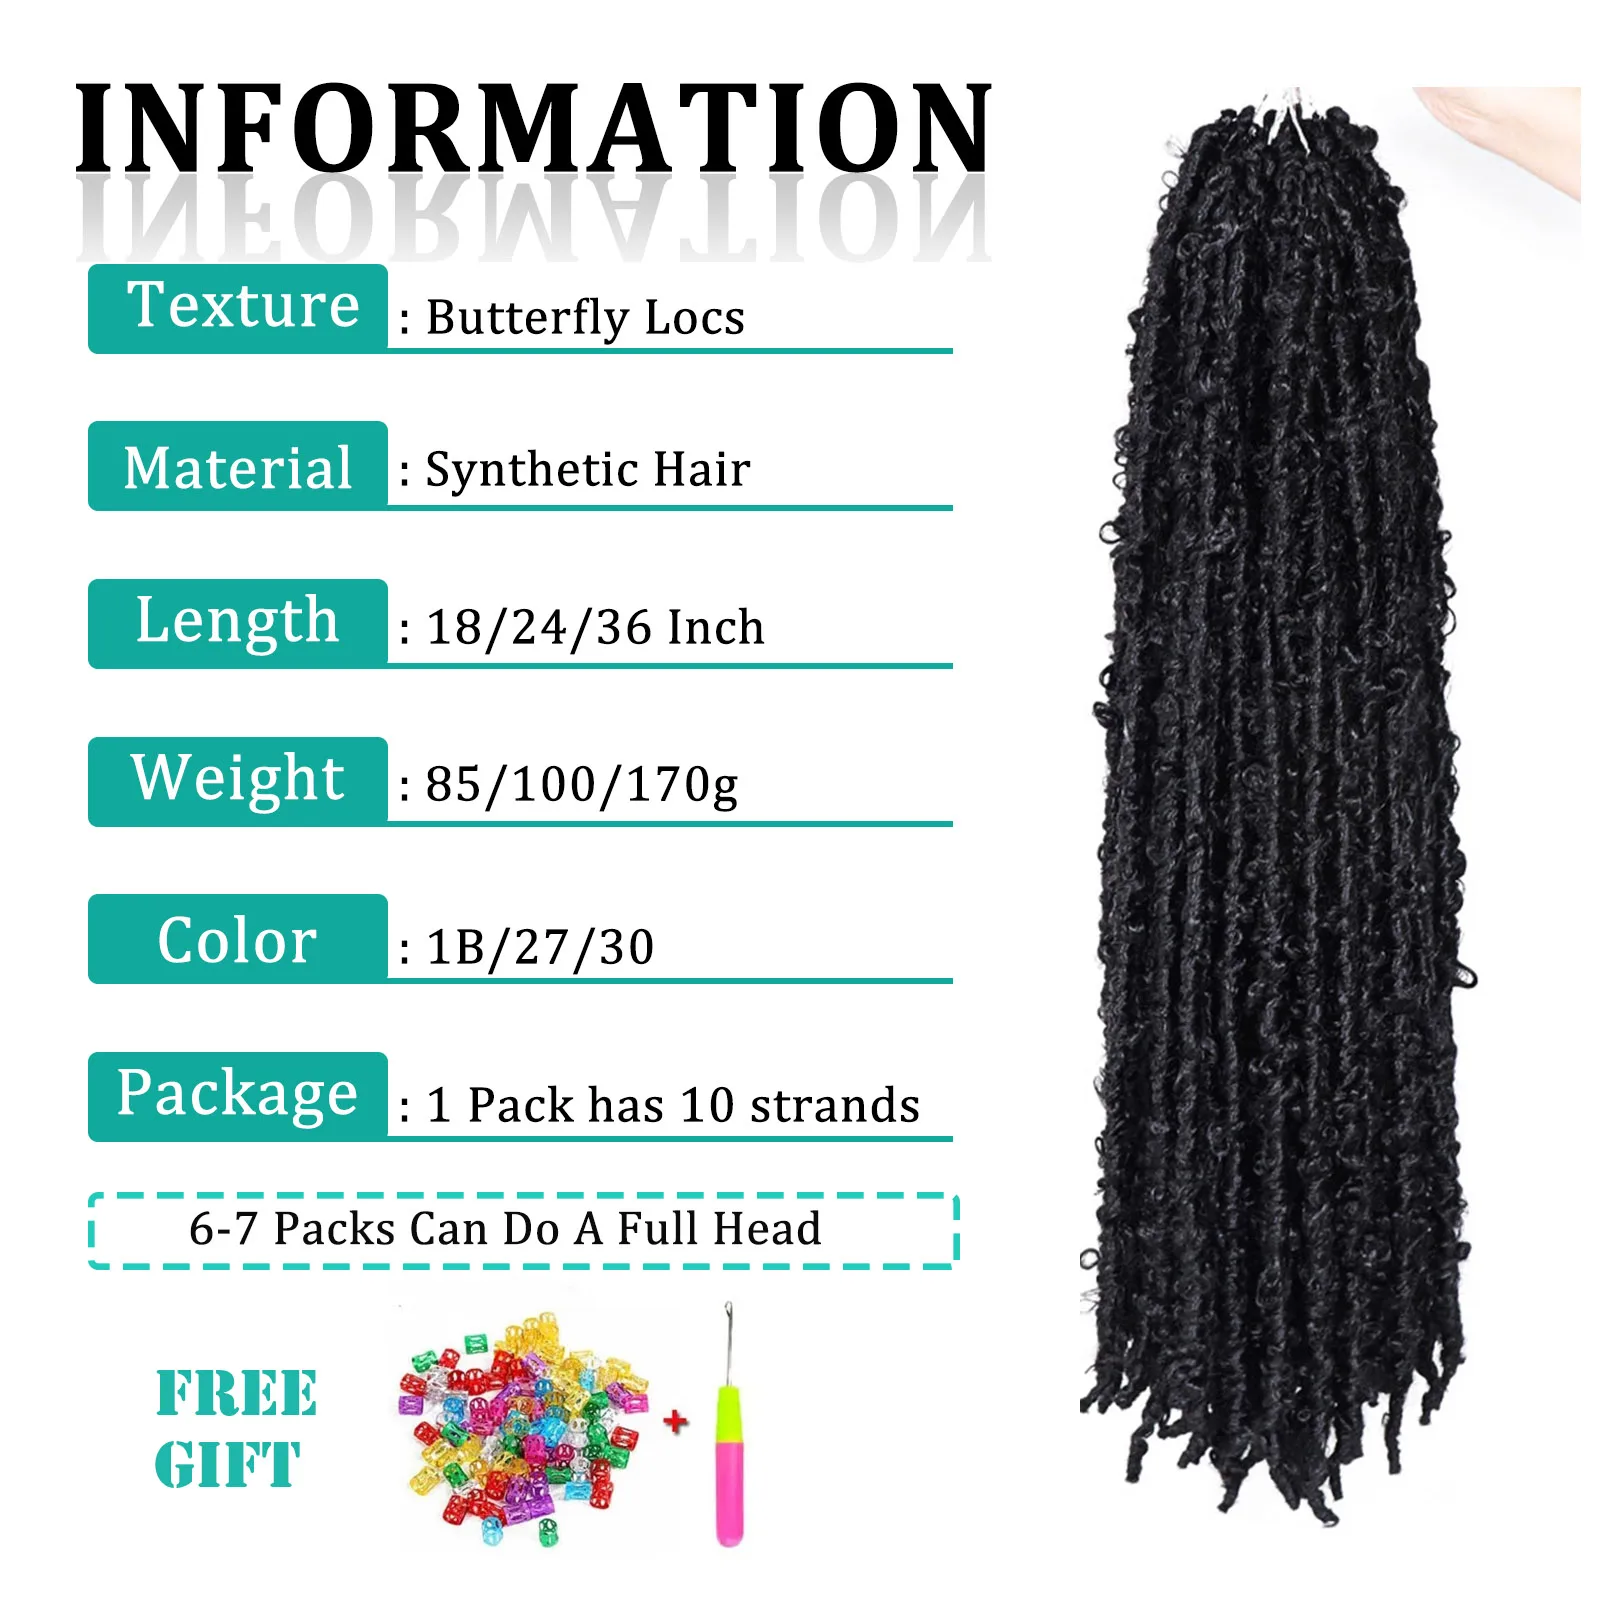 18 24 36 Inch Butterfly Locs Crochet Hair Extensions Synthetic